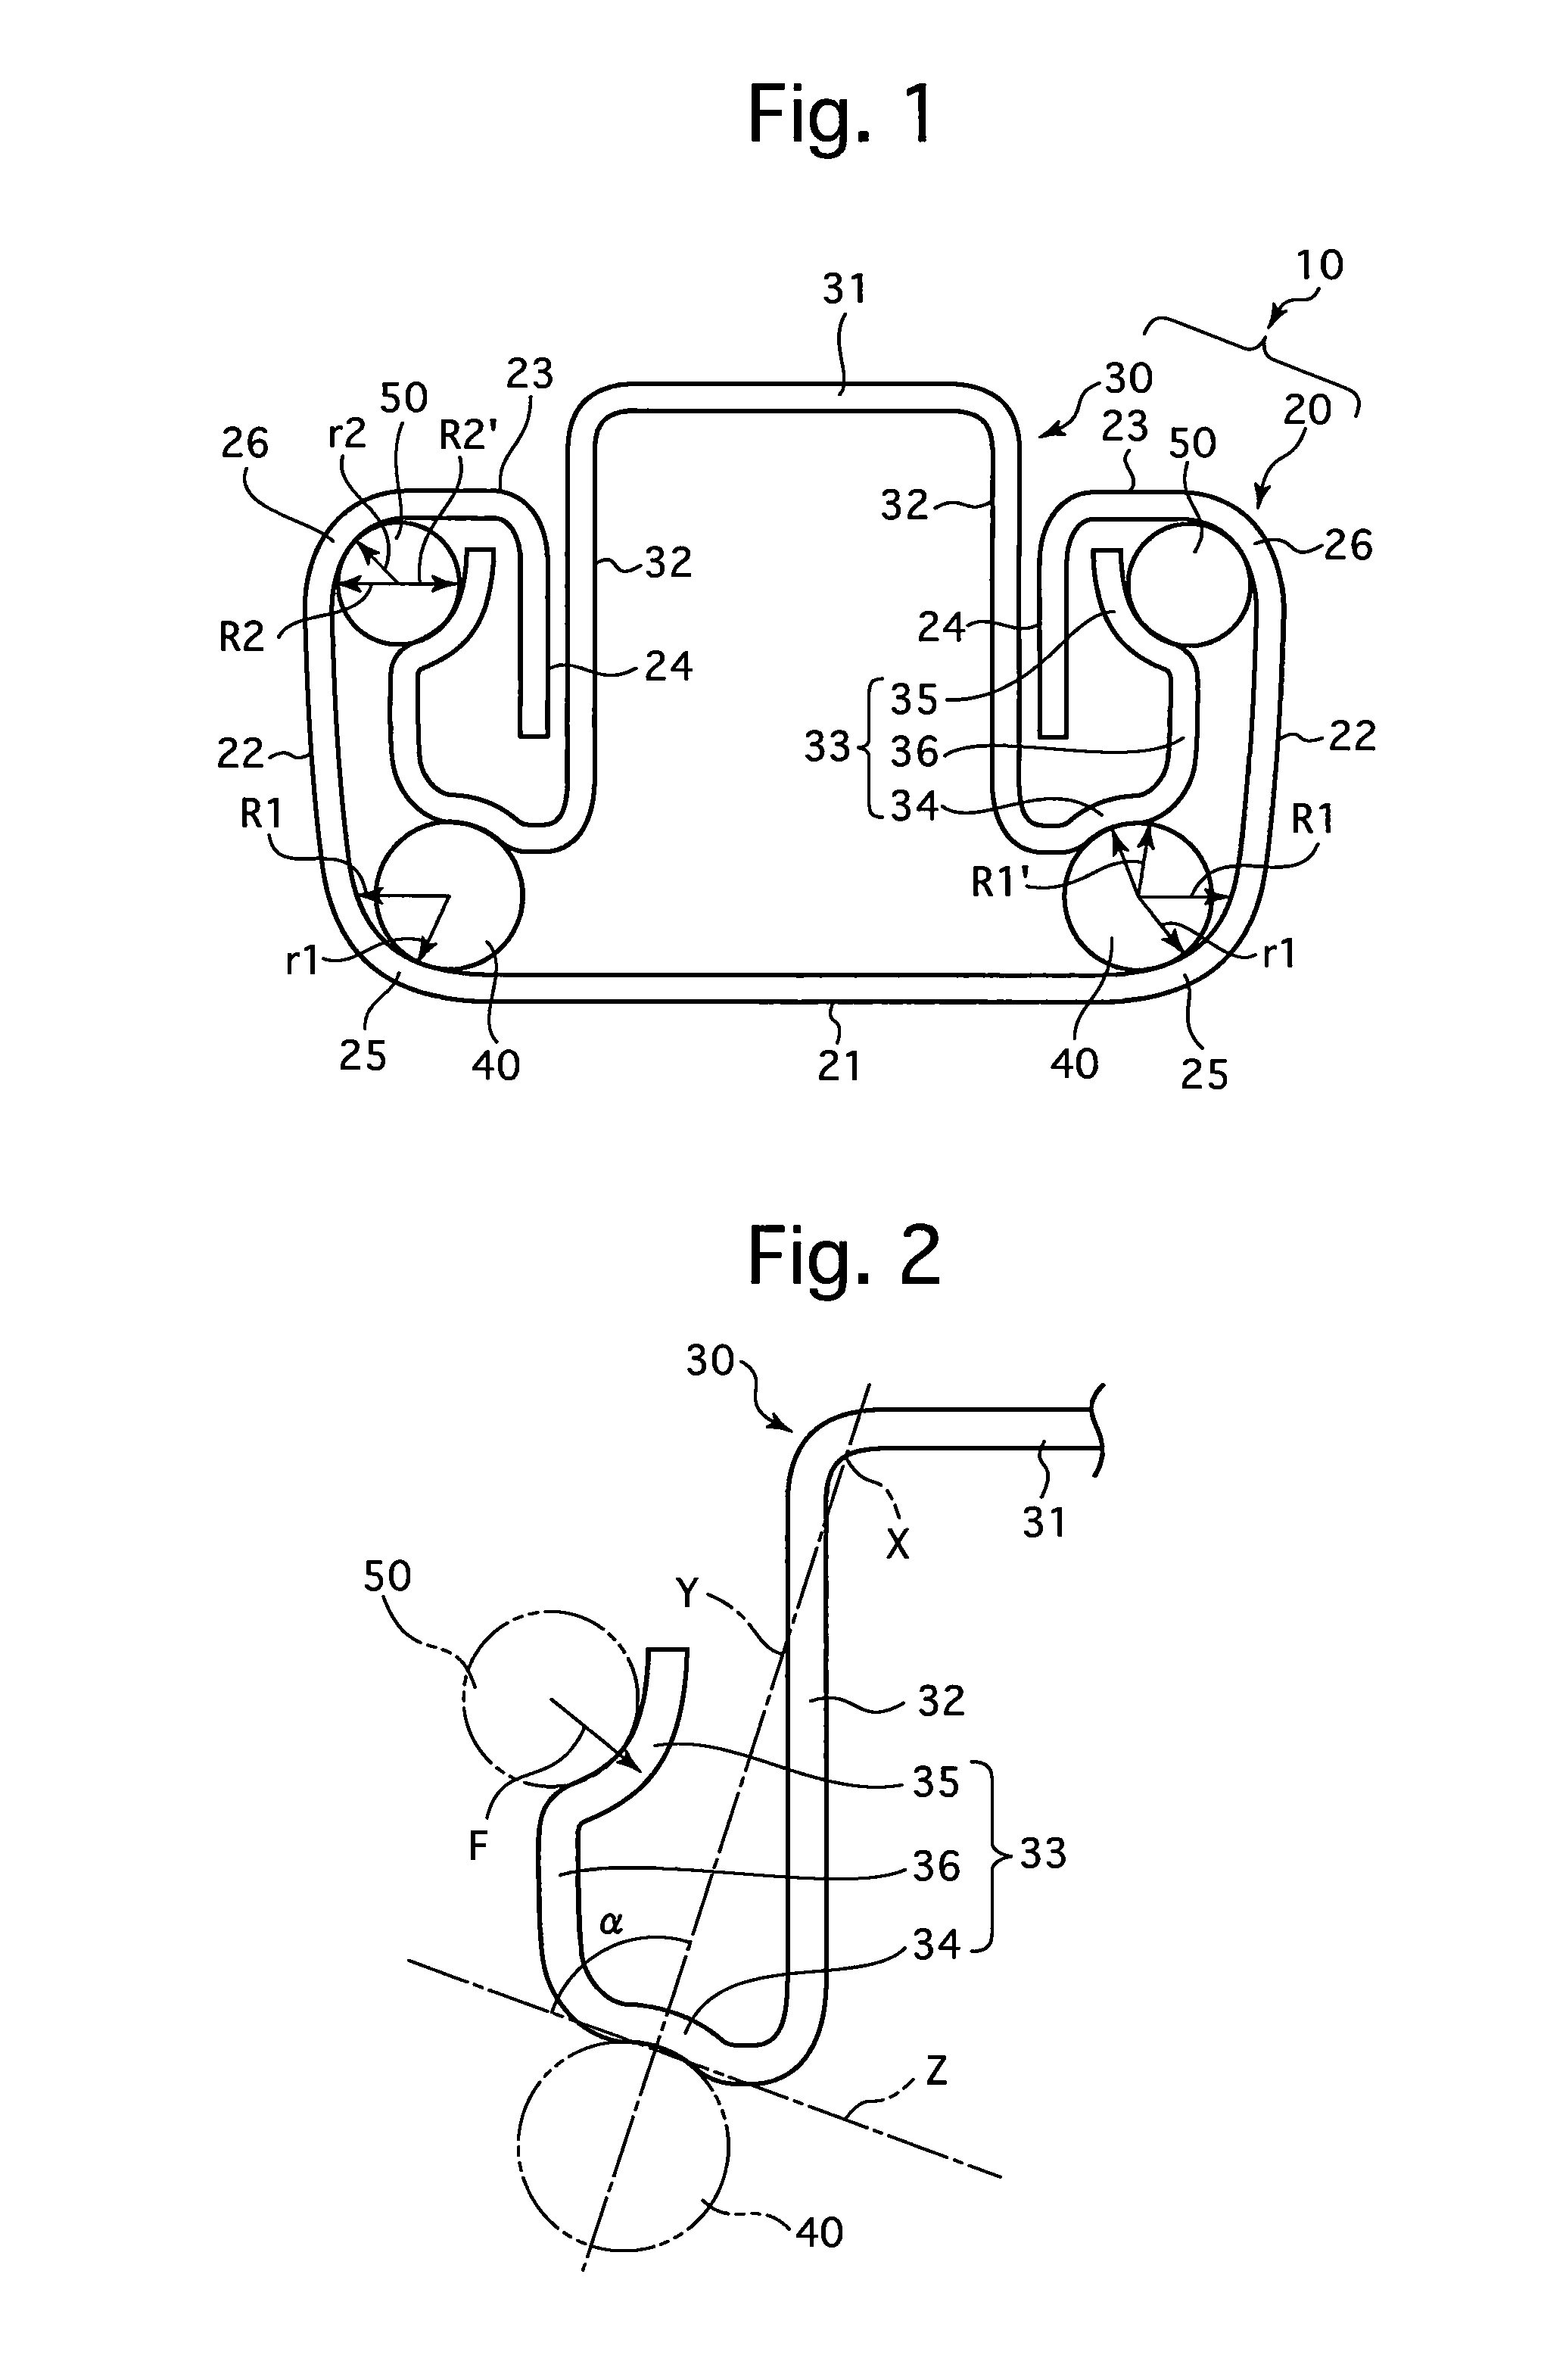 Slide rail device for vehicle seat